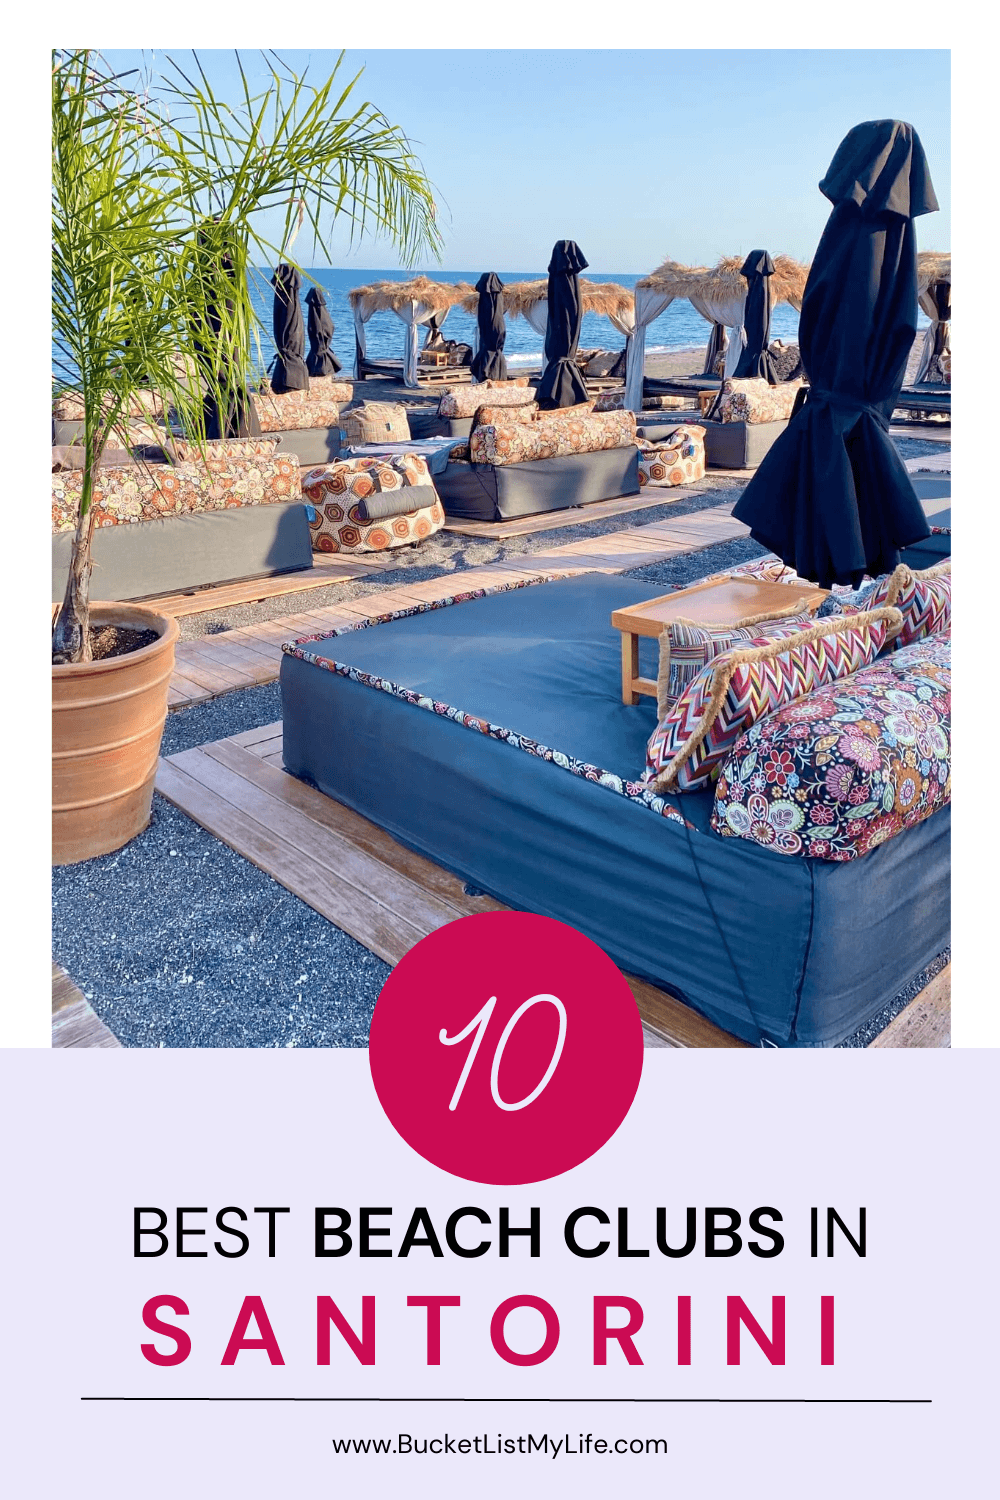 10 Best Beach Clubs in Santorini for a Luxurious Day (2023)